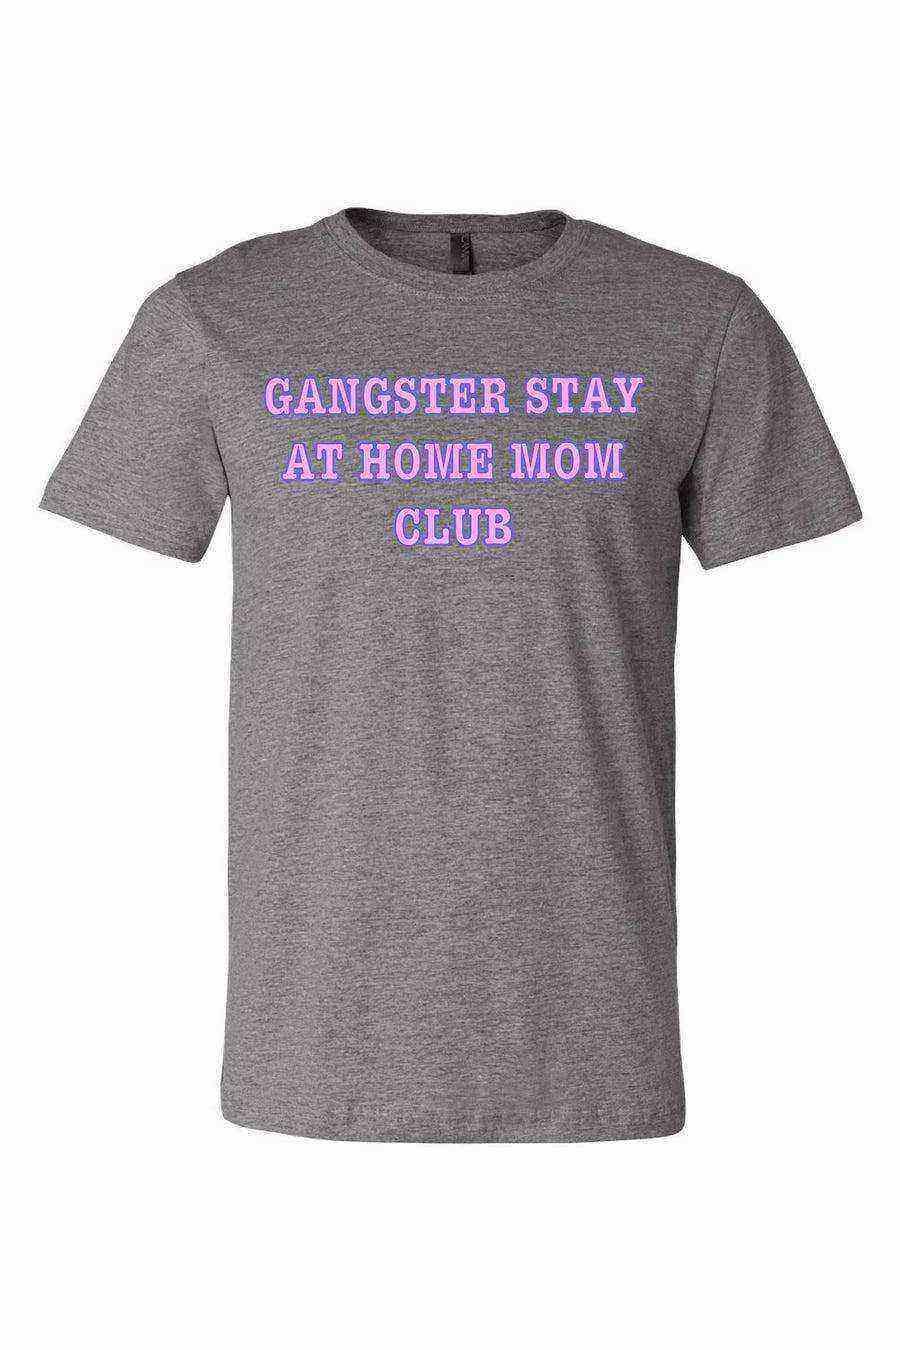 Youth | Gangster Stay At Home Mom Club Shirt - Dylan's Tees